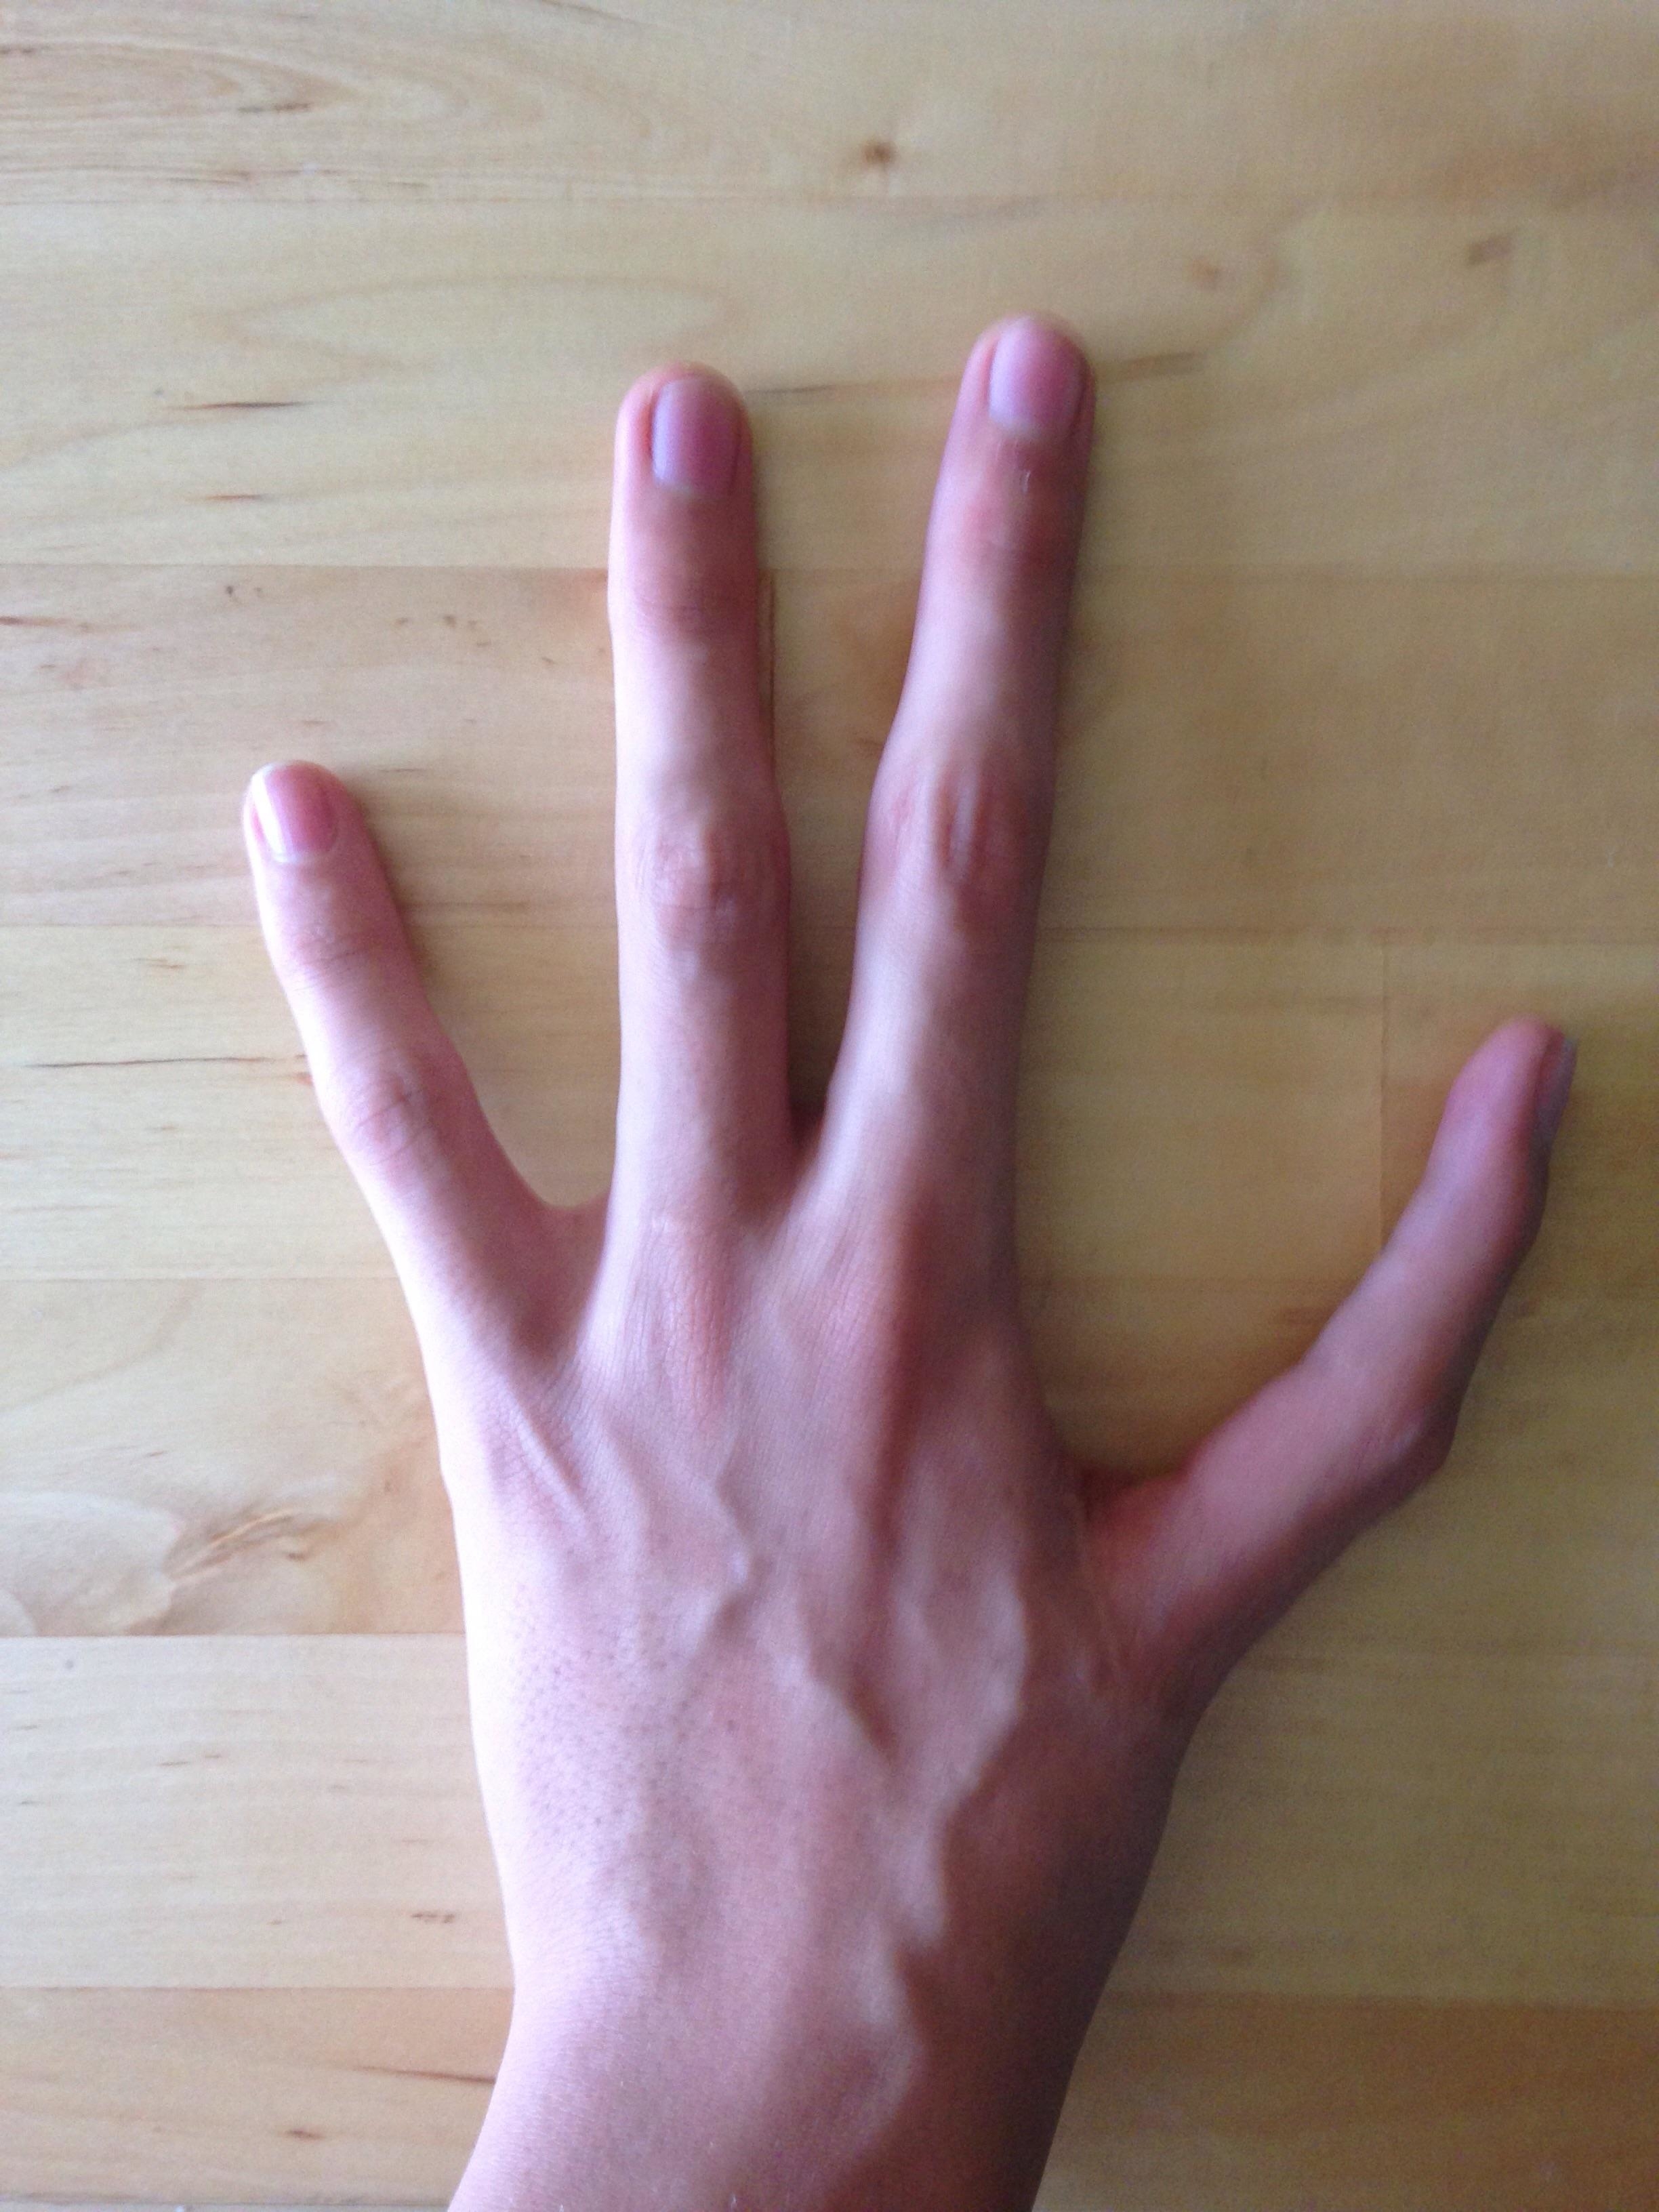 A person with four fingers on their hand